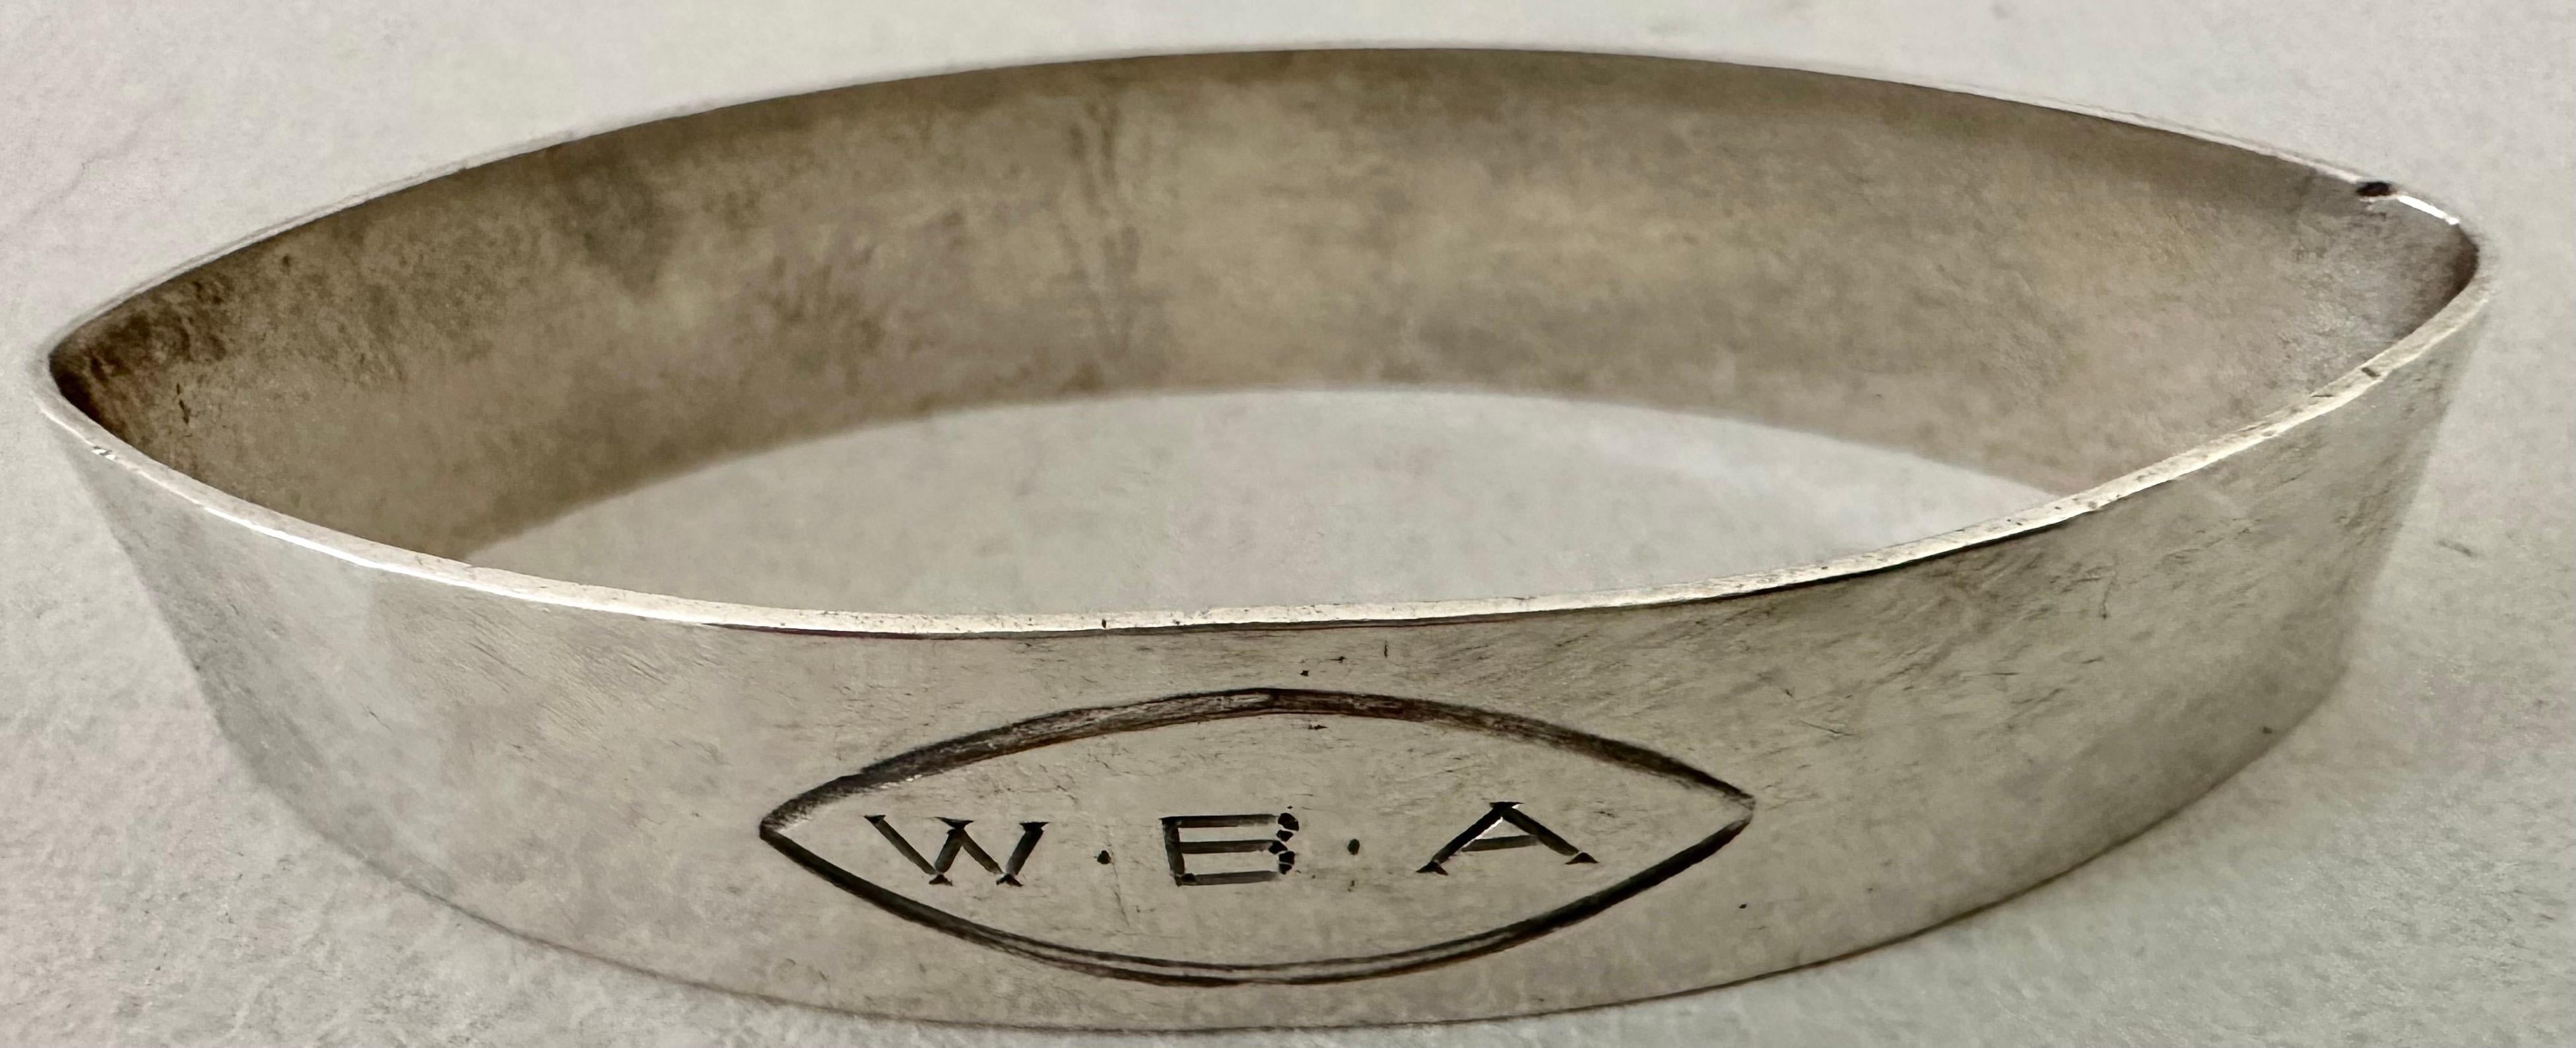 Vintage Oval Sterling Monogramed Napkin Ring In Good Condition For Sale In Sheffield, MA